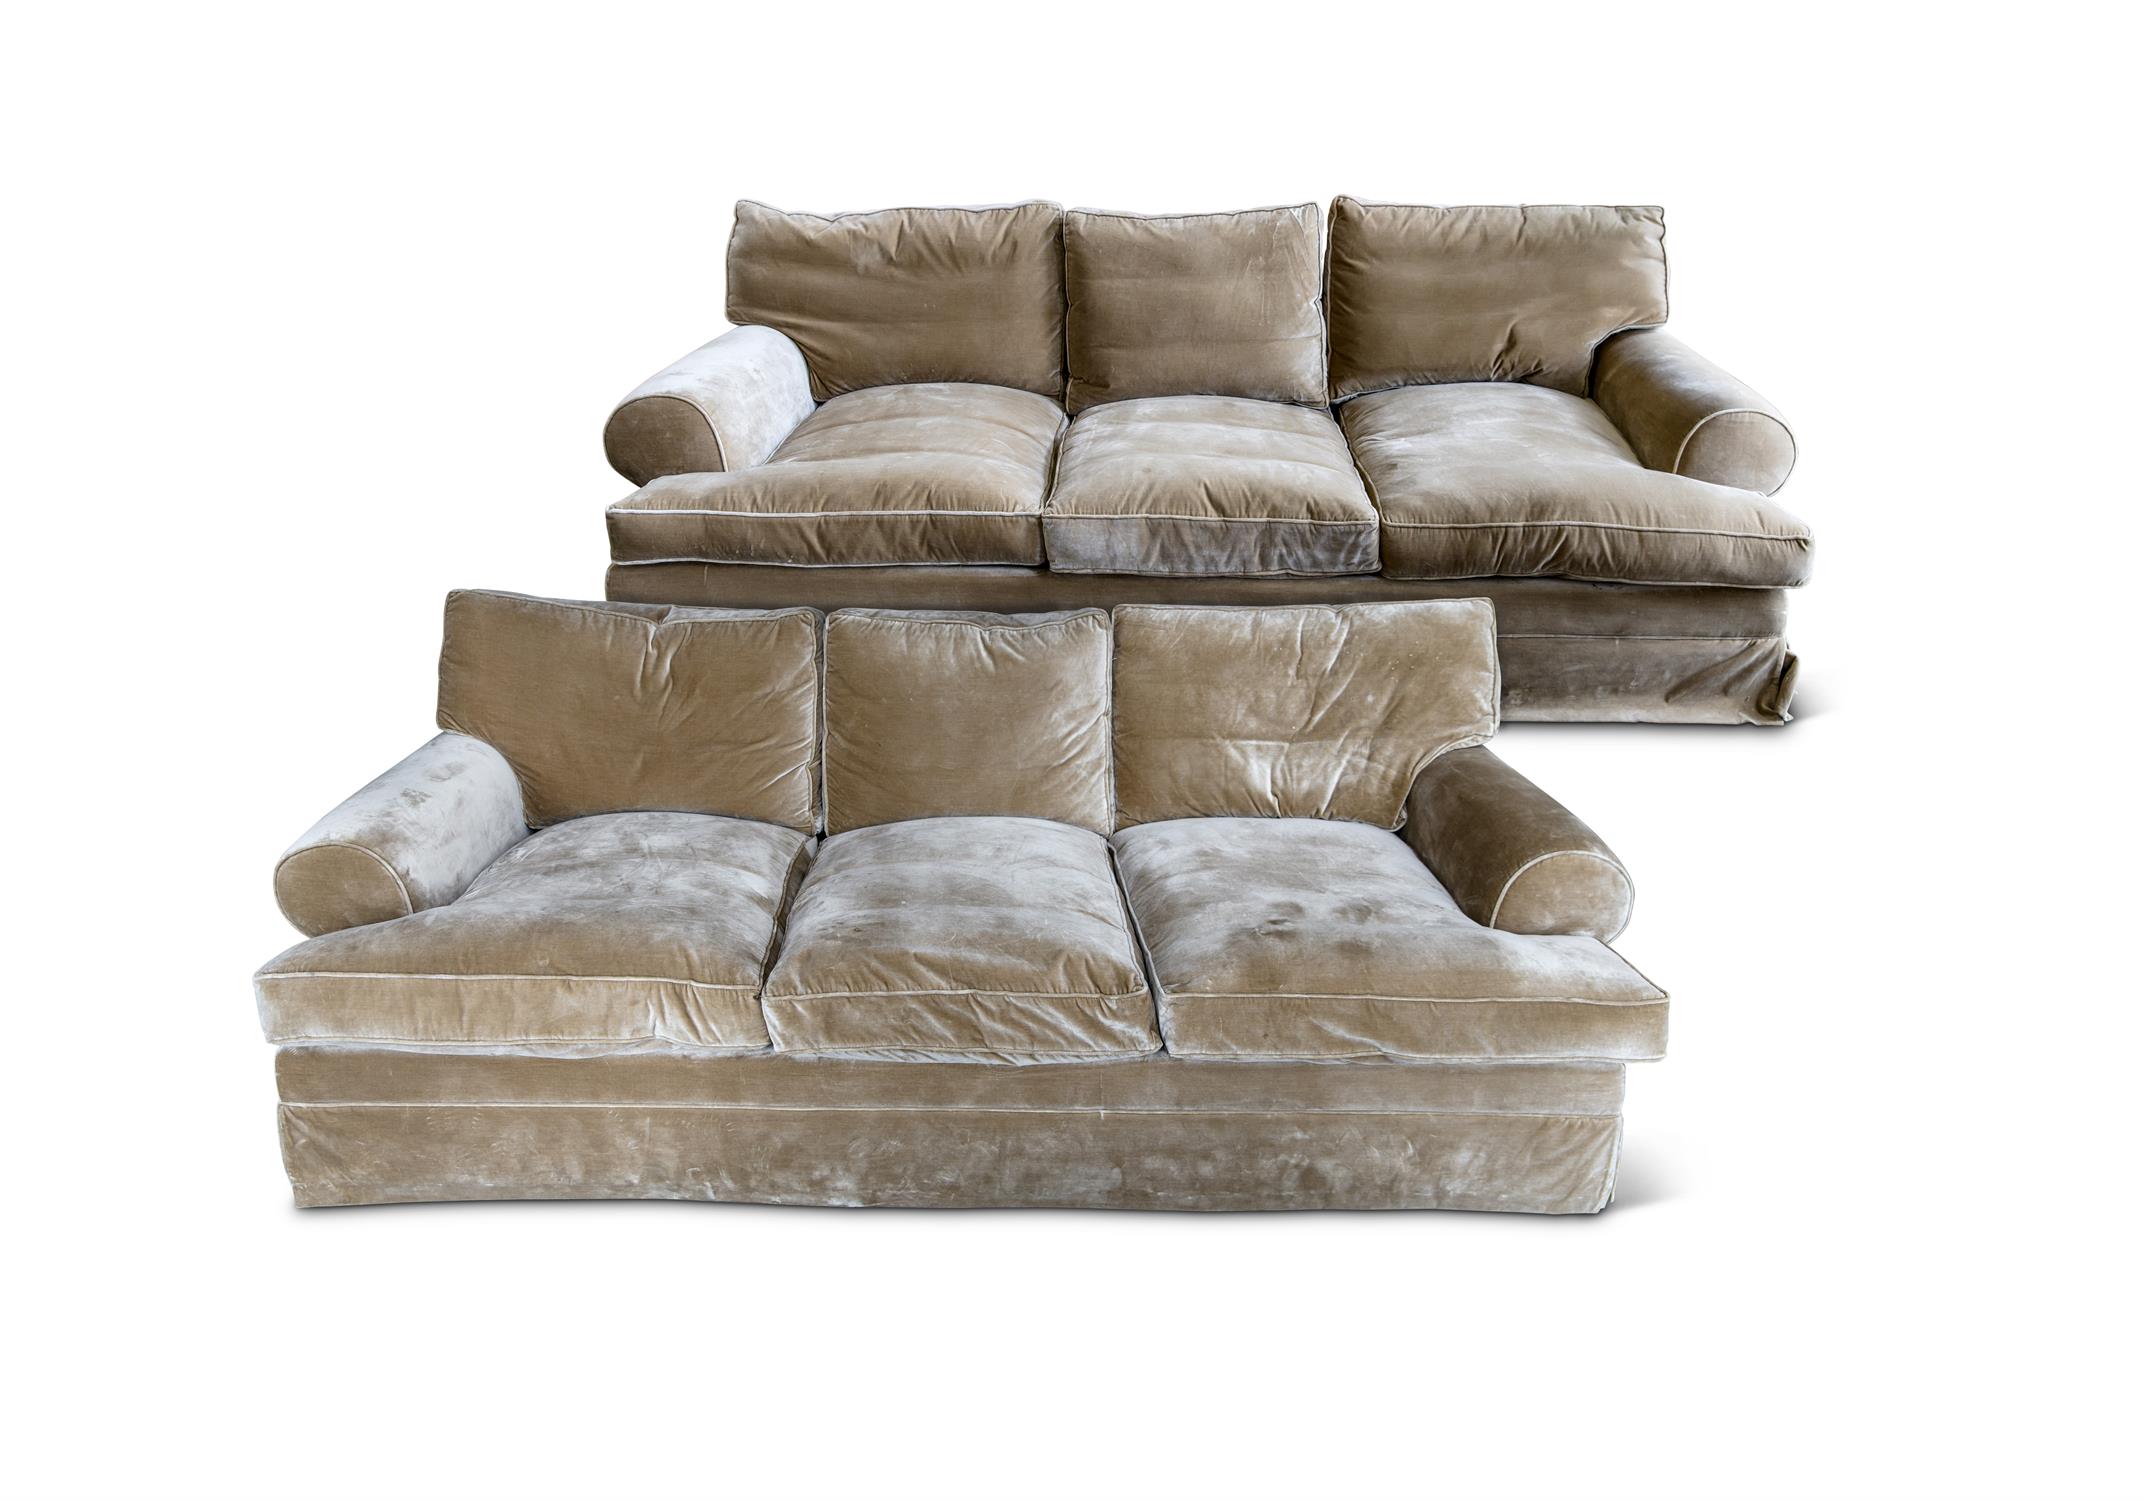 A PAIR OF LARGE THREE-SEATER SOFAS